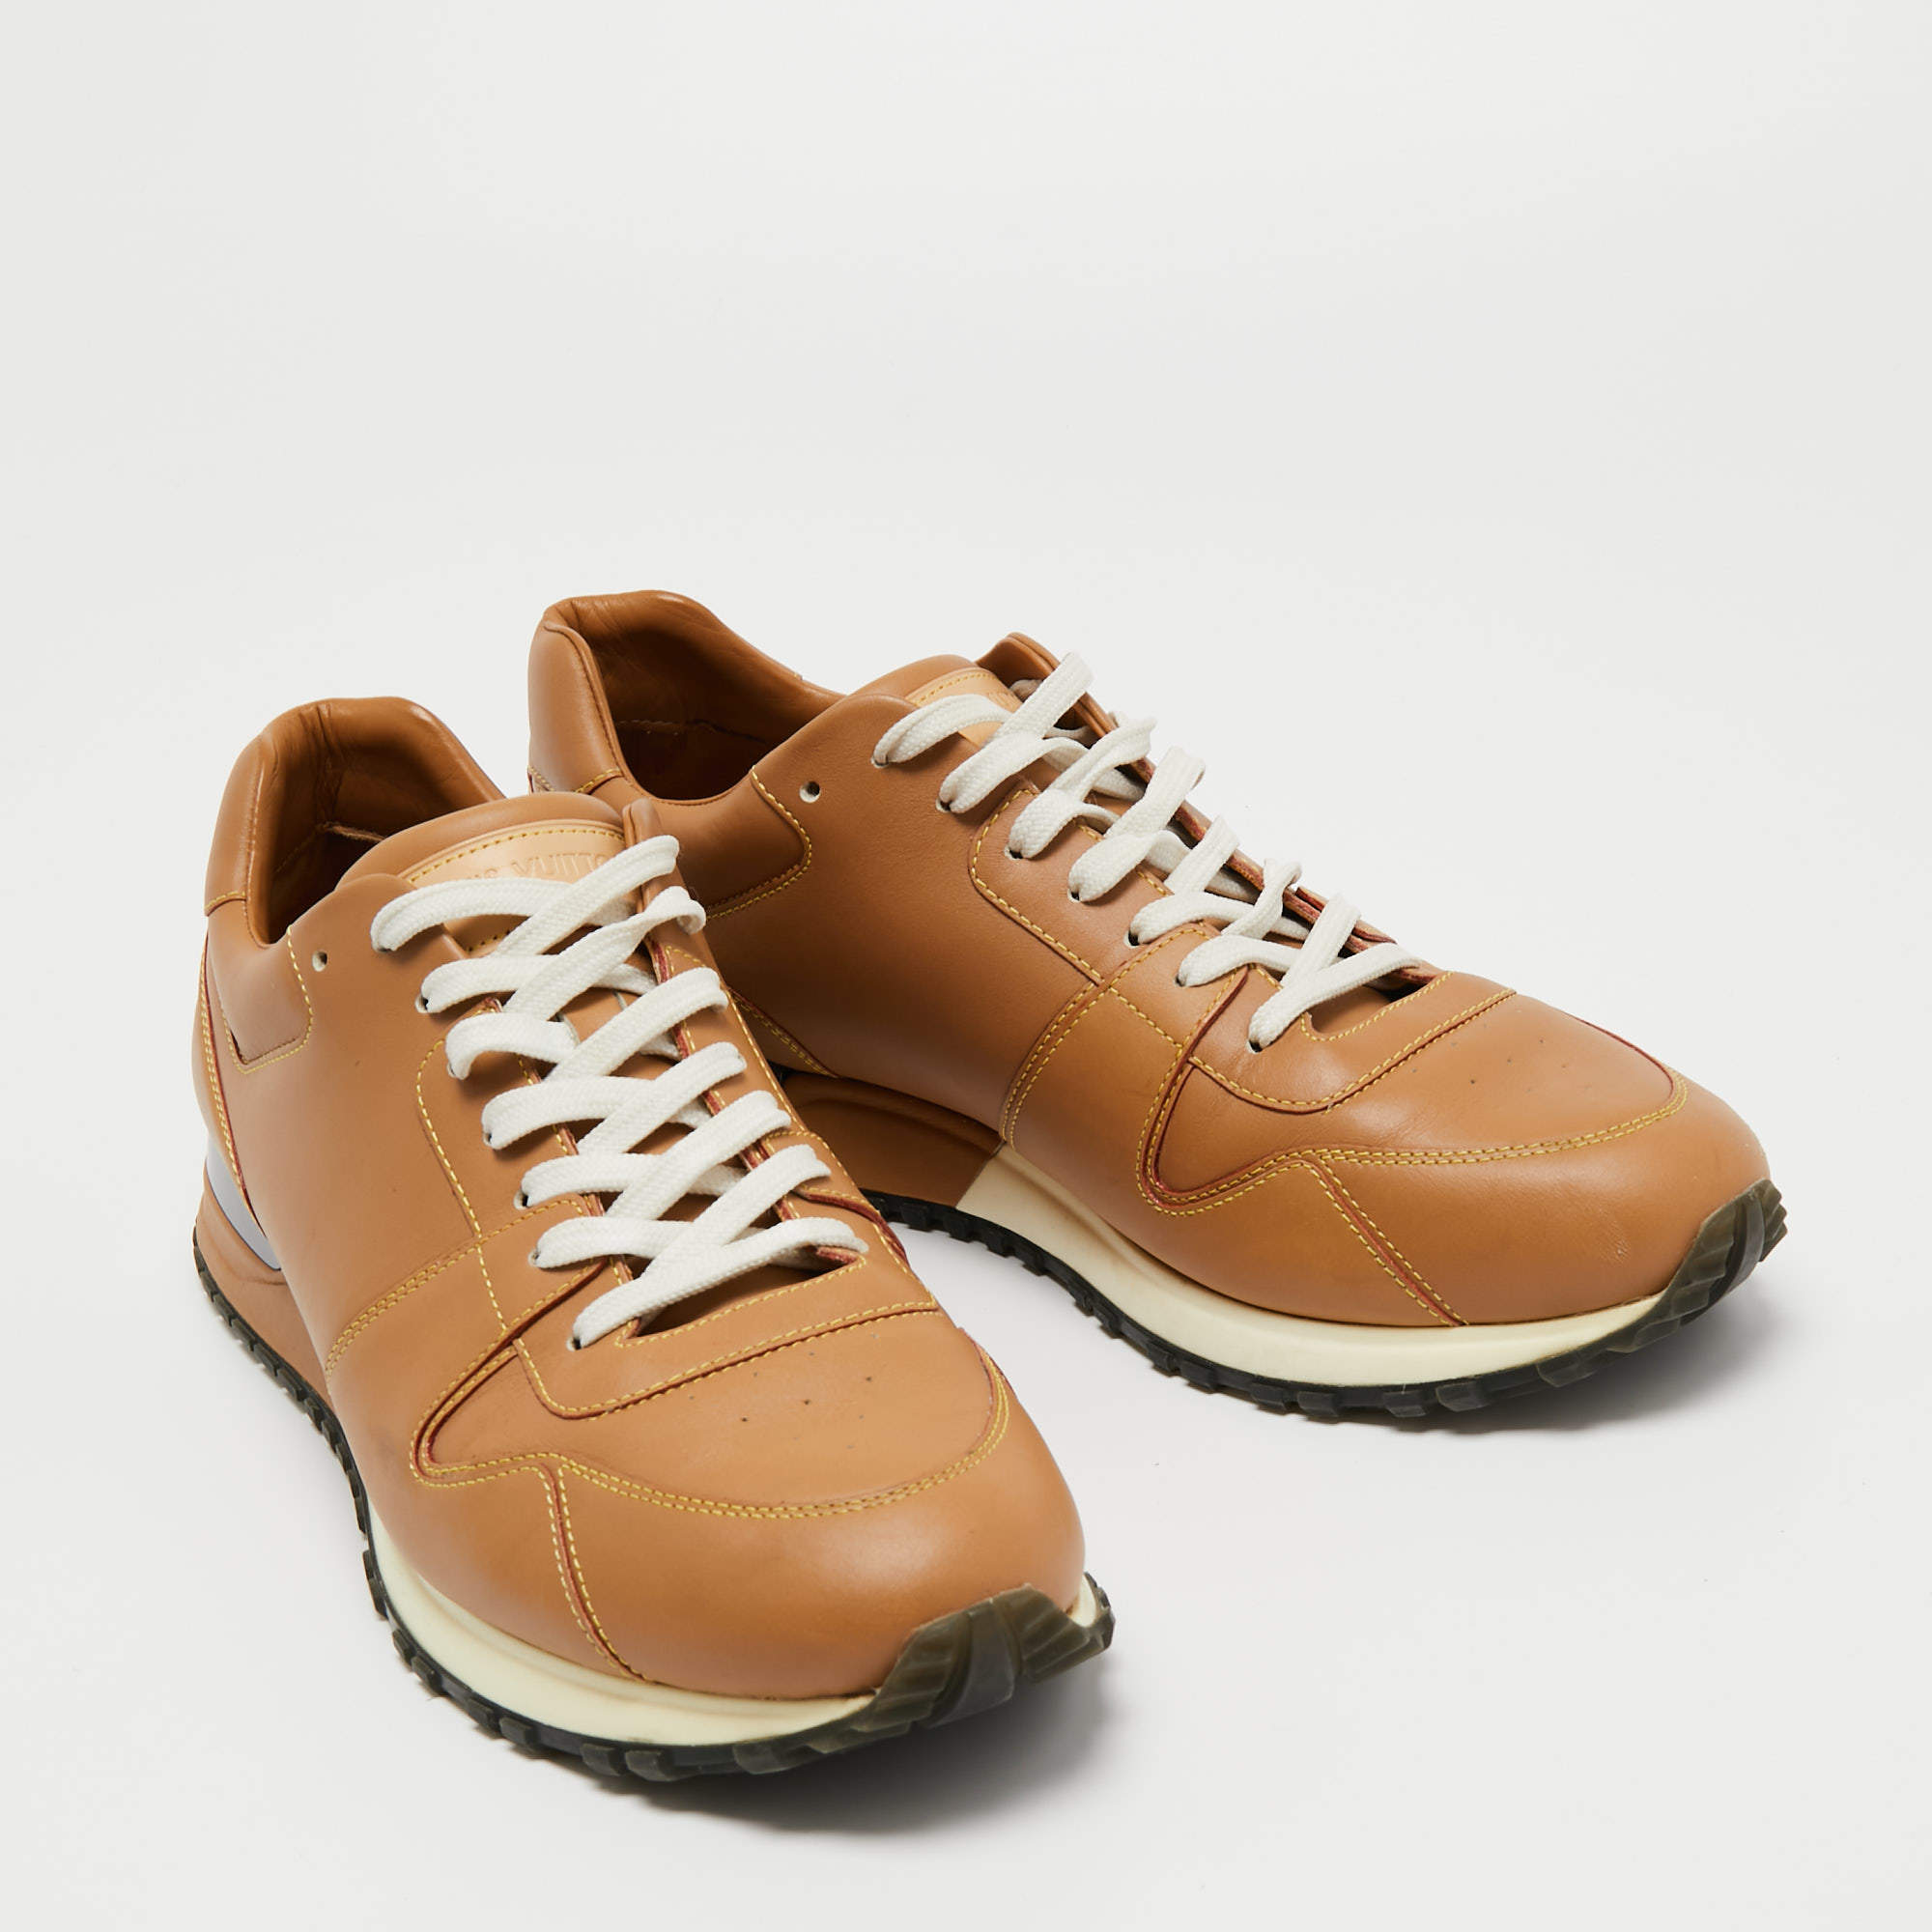 Run away leather trainers Louis Vuitton Brown size 38 EU in Leather -  35975909